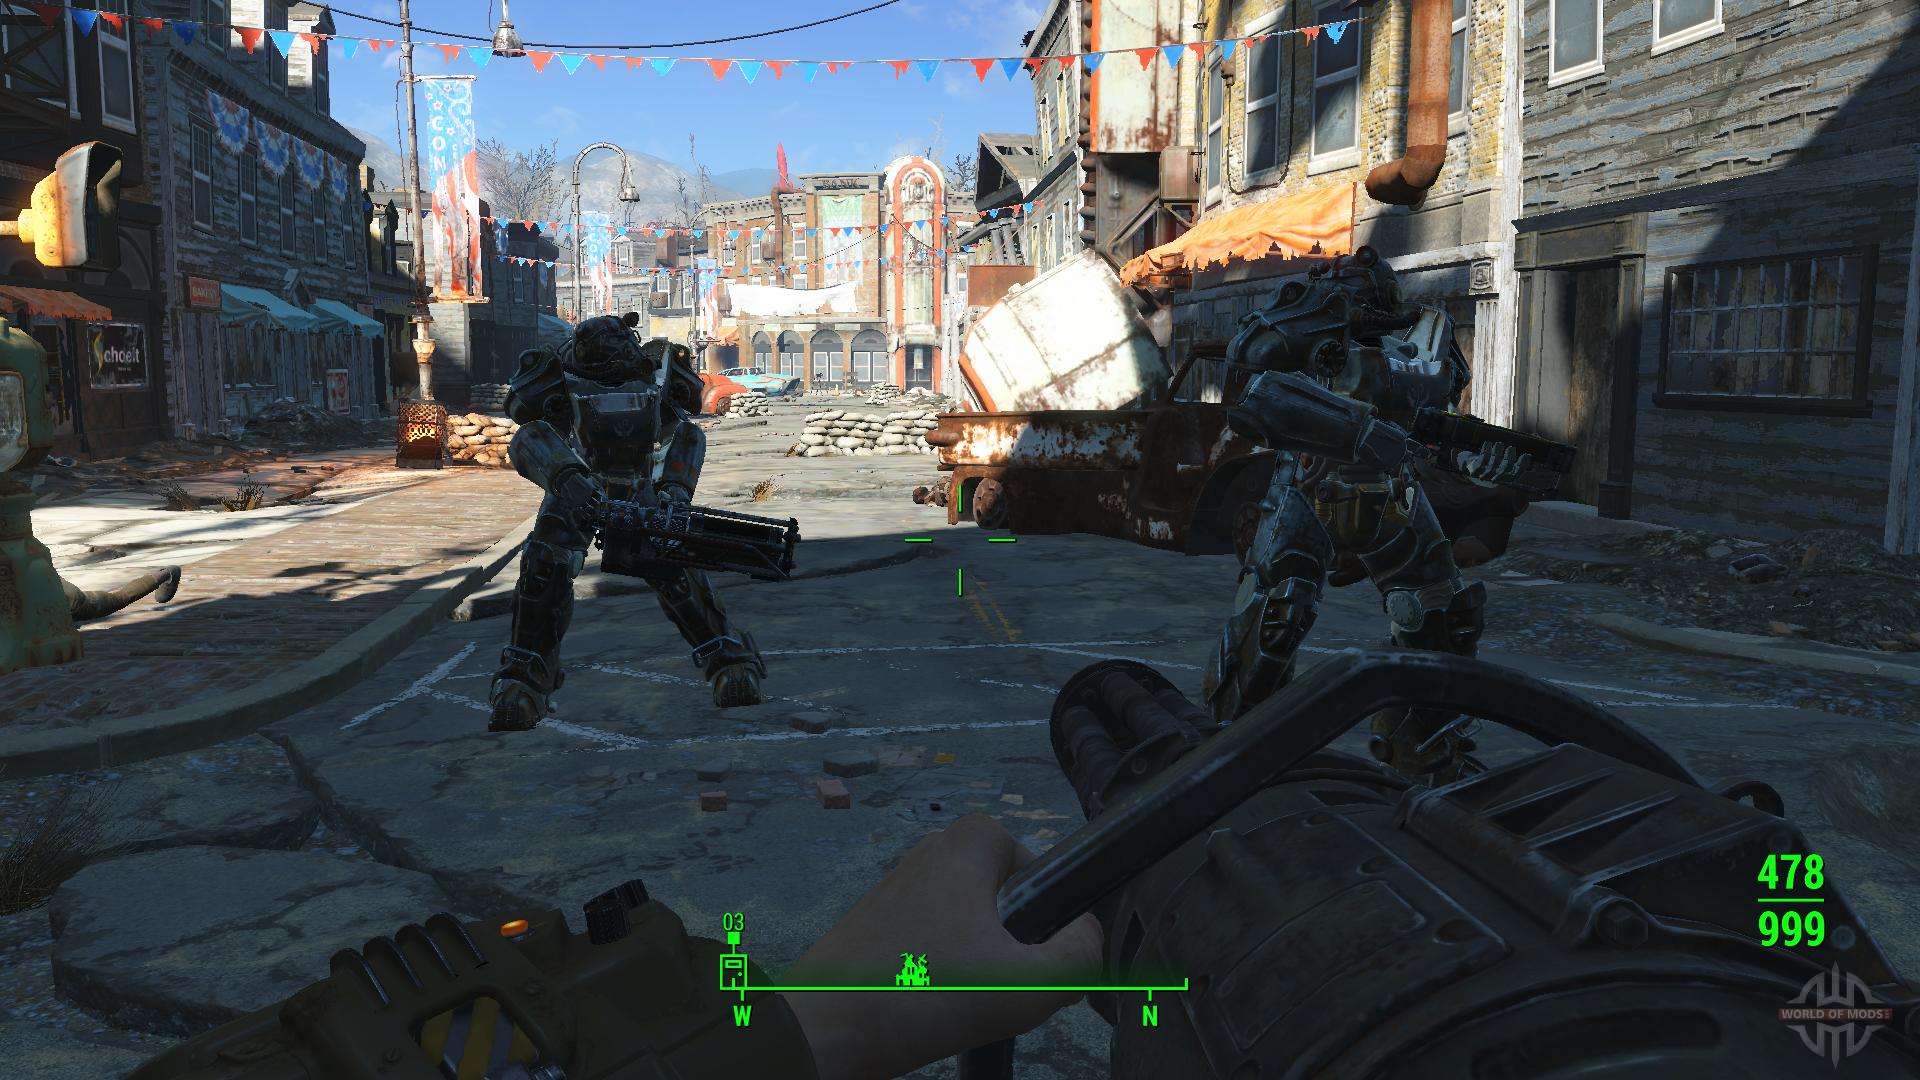 Fallout 4 support the brotherhood recon team